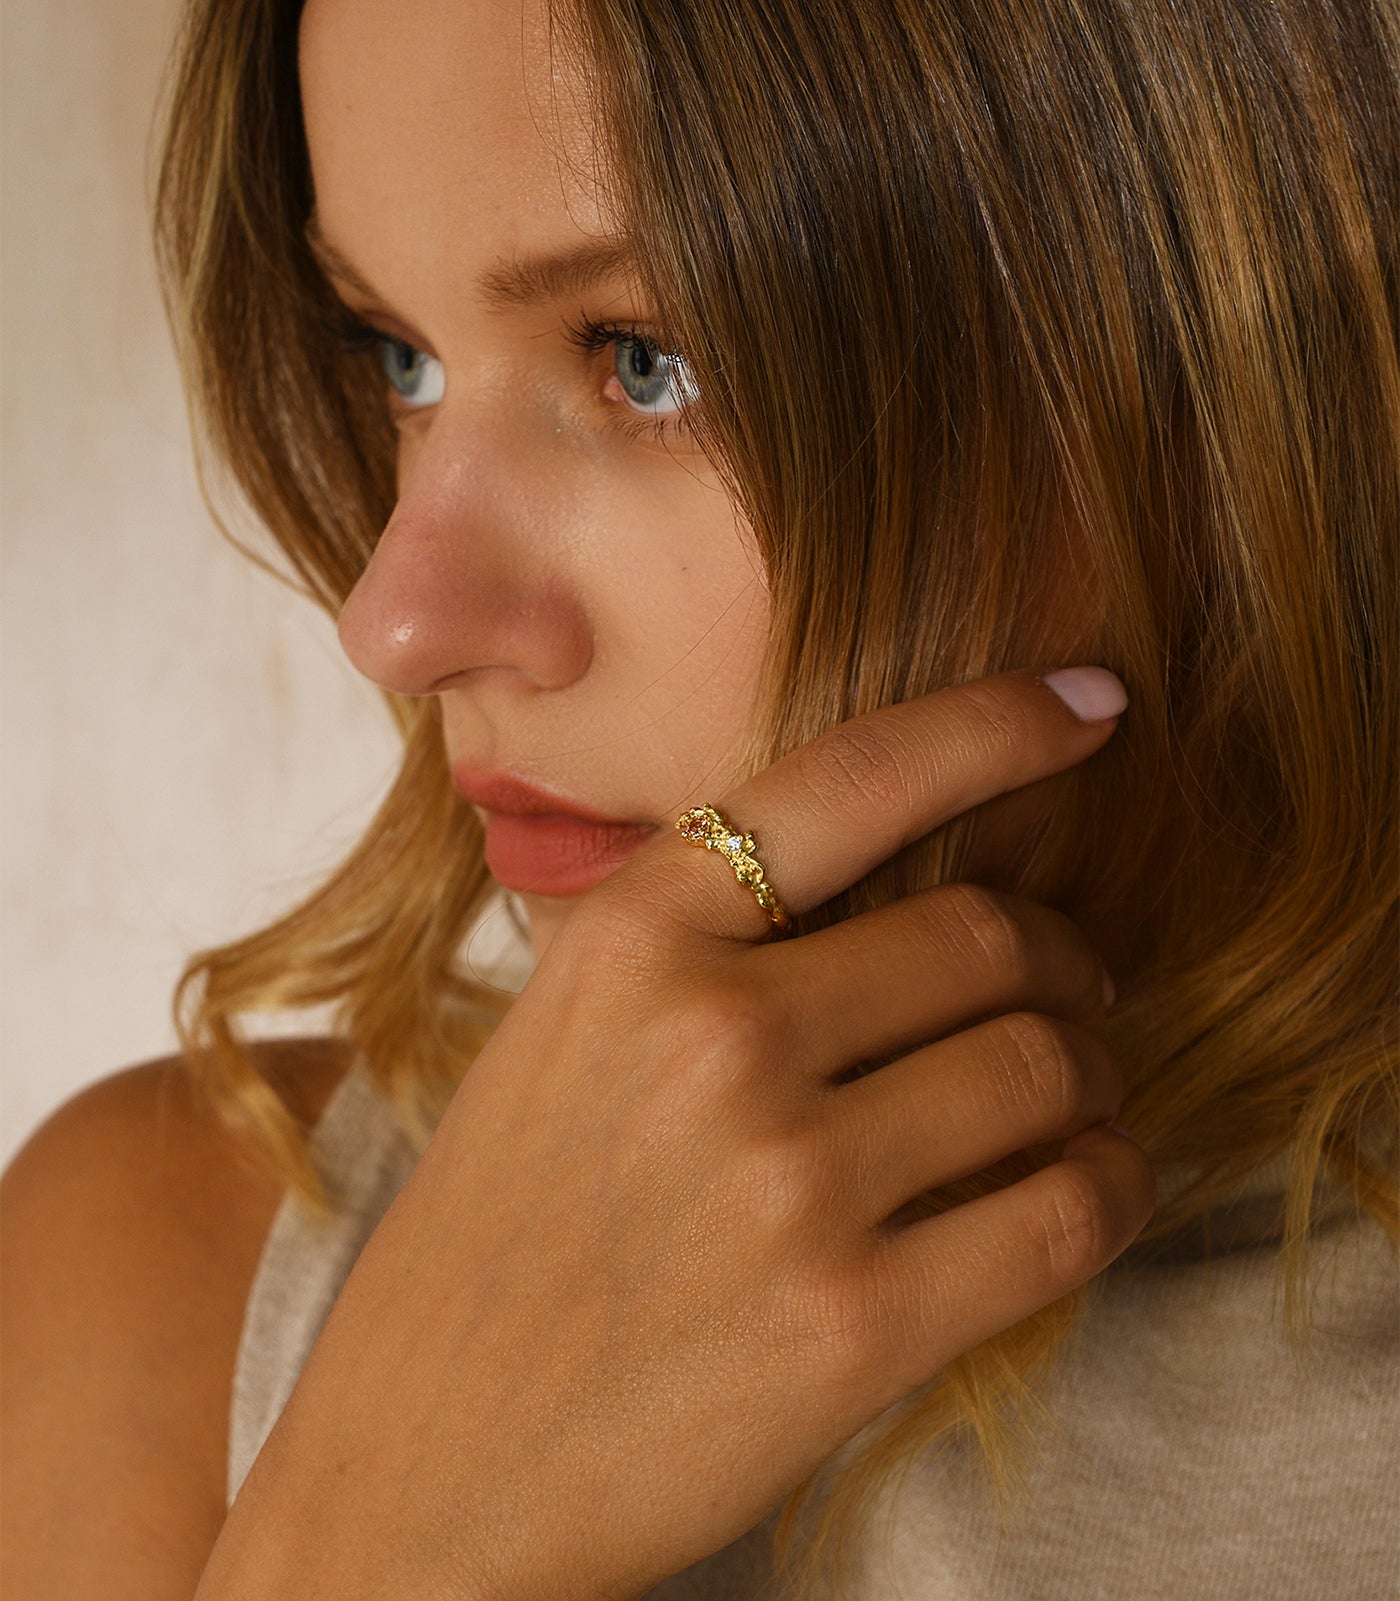 A model wears a gold vermeil ring. The ring features a textured design with a champagne gold gemstone.